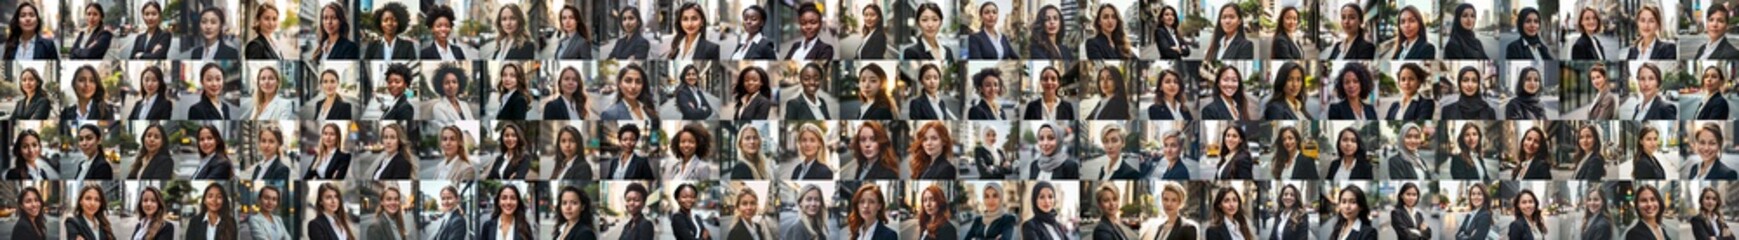 composite portrait of mug shots of different serious young businesswomen headshots, including all ethnic, racial, and geographic types of women in the world outside a city street - Powered by Adobe